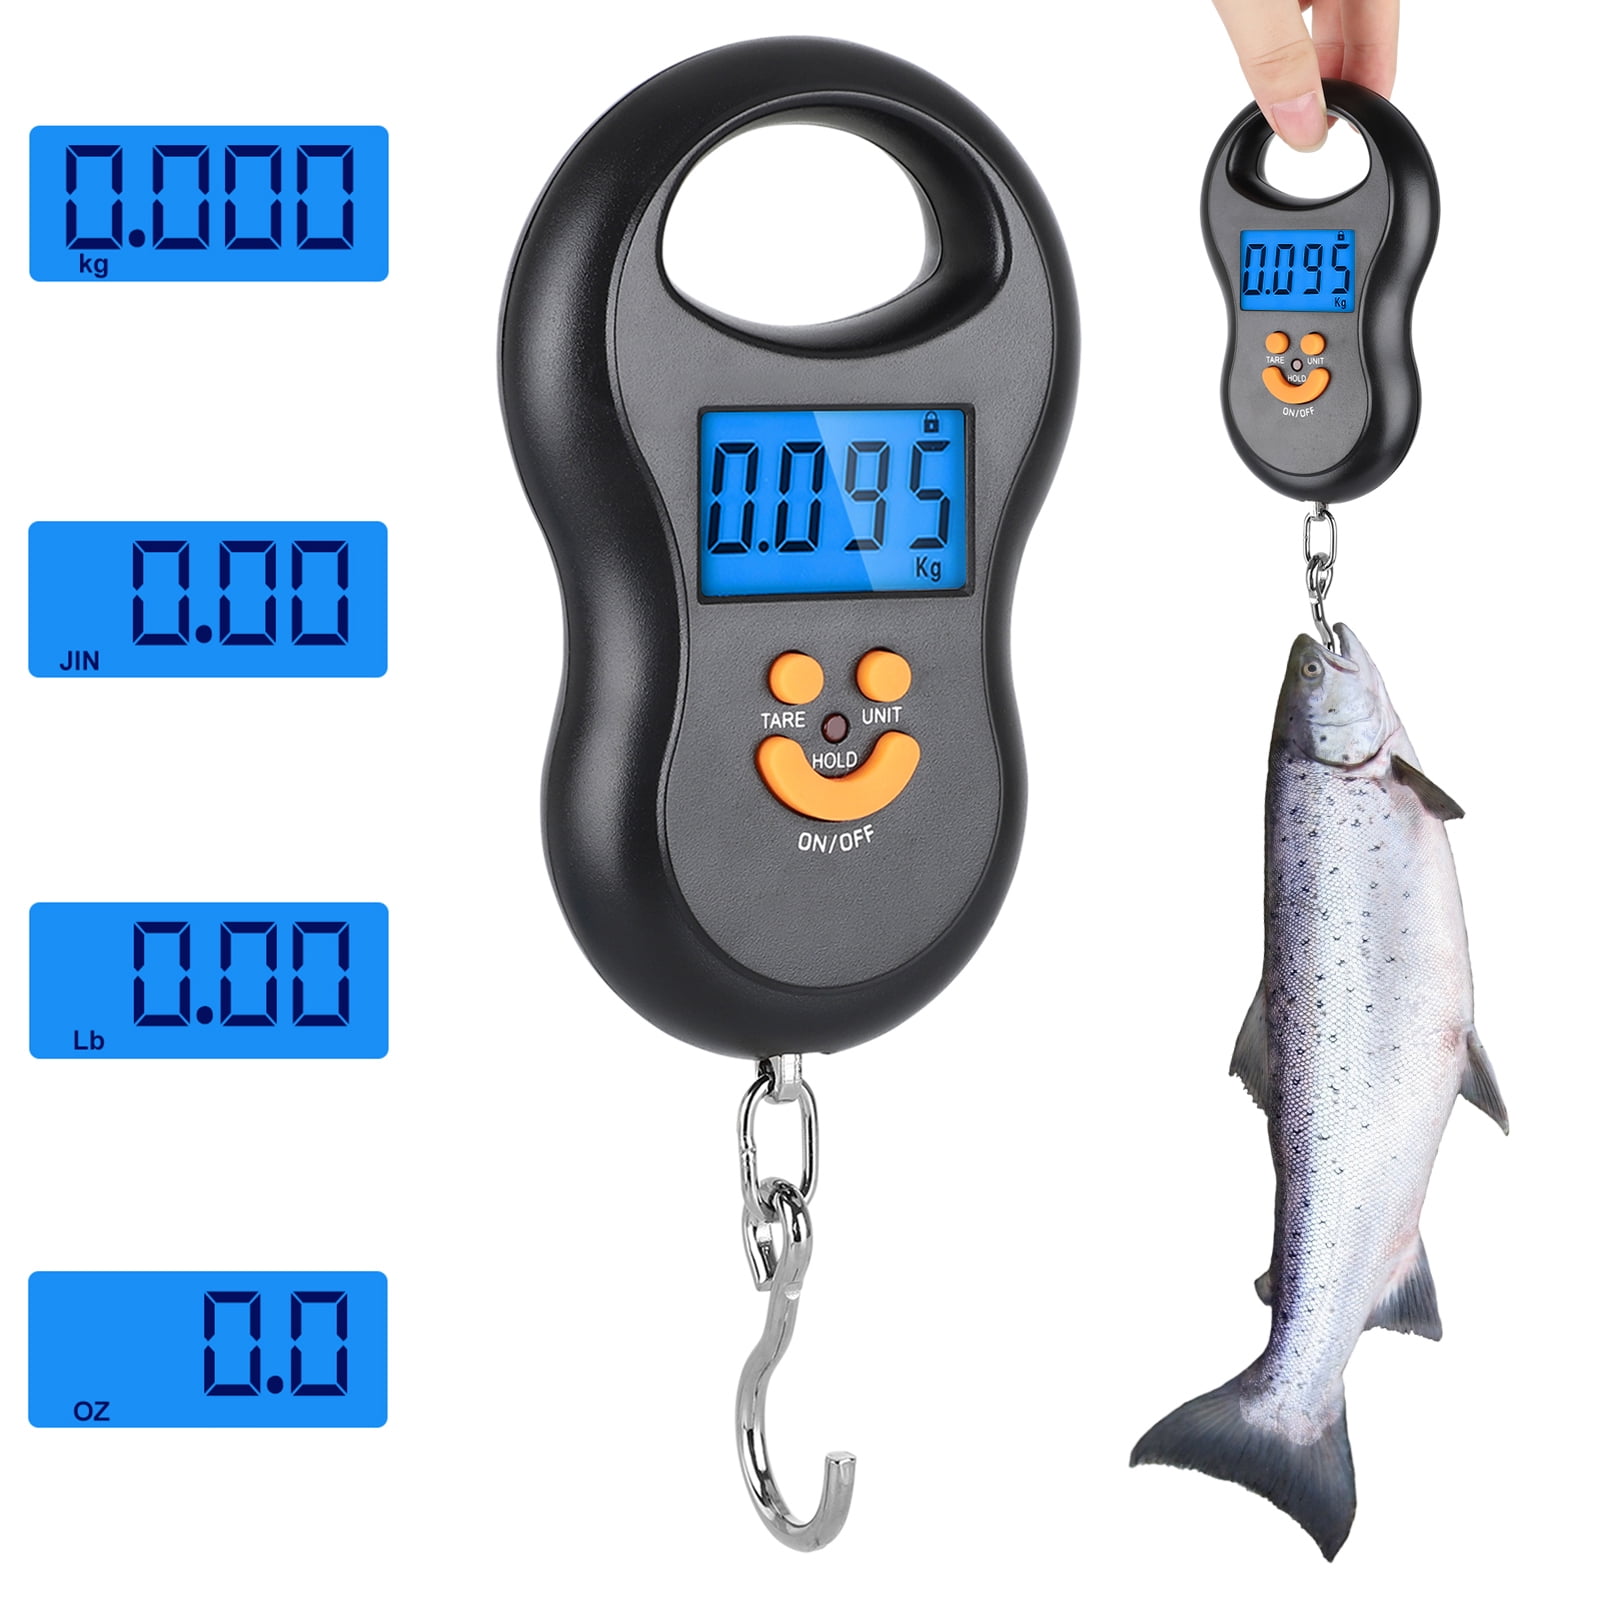 Yosoo Health Gear Hanging Digital Scale 40KG Digit Fishing Scale with Backlit LCD Display for Home and Outdoor Batteries Not Included